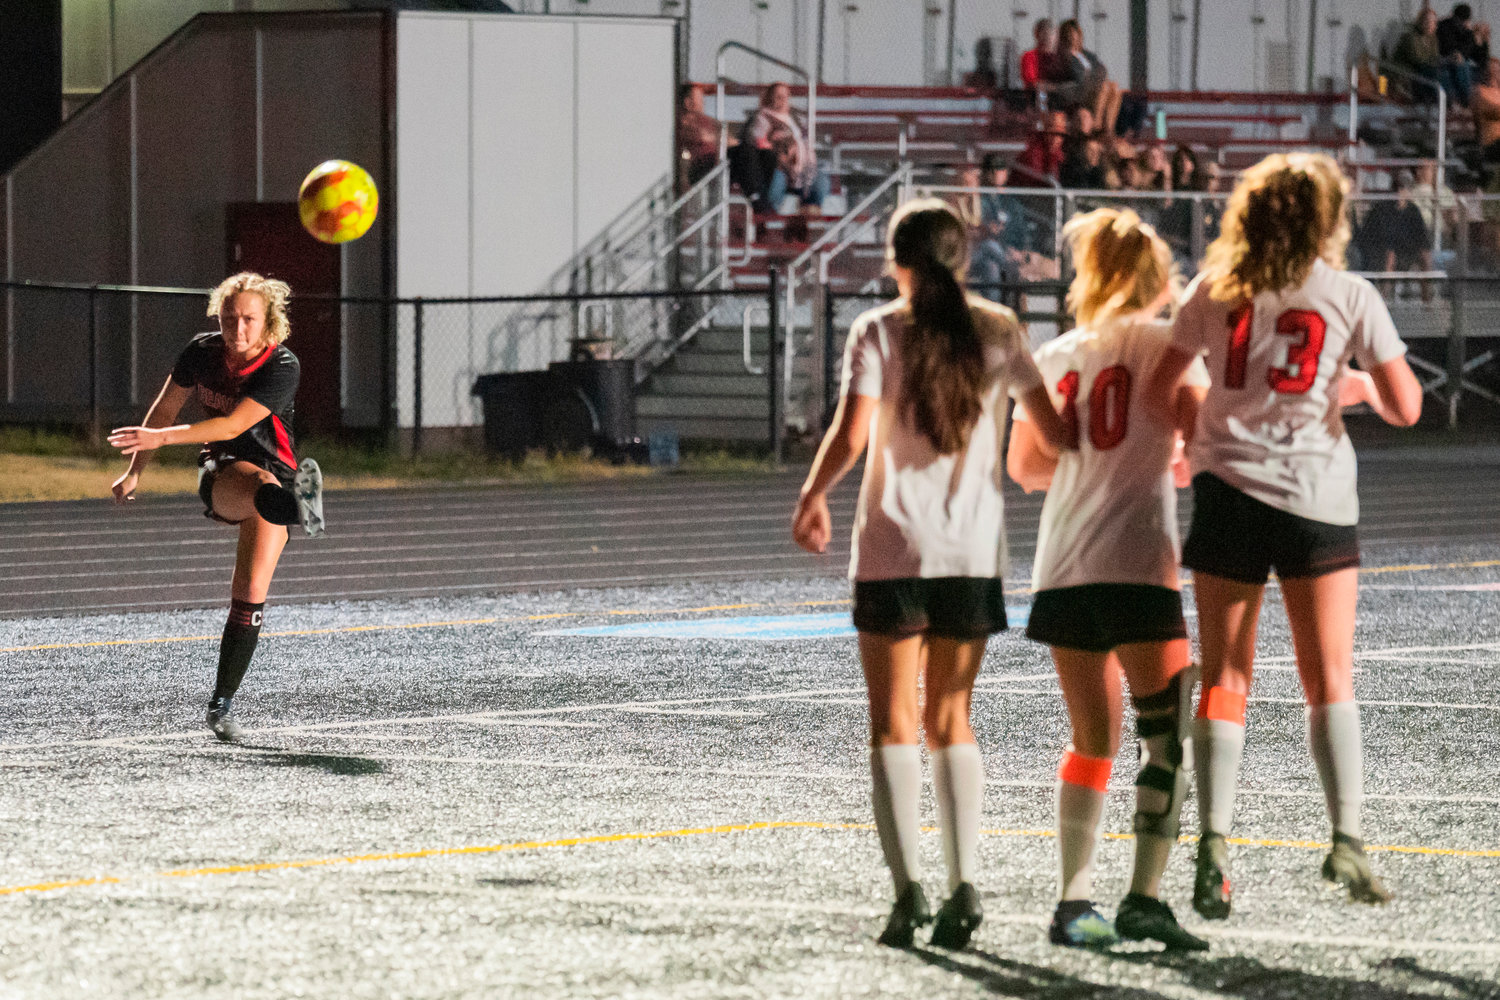 Tenino attempts to score during a free kick at Beaver Stadium as Centralia defends their goal with a wall Tuesday night.